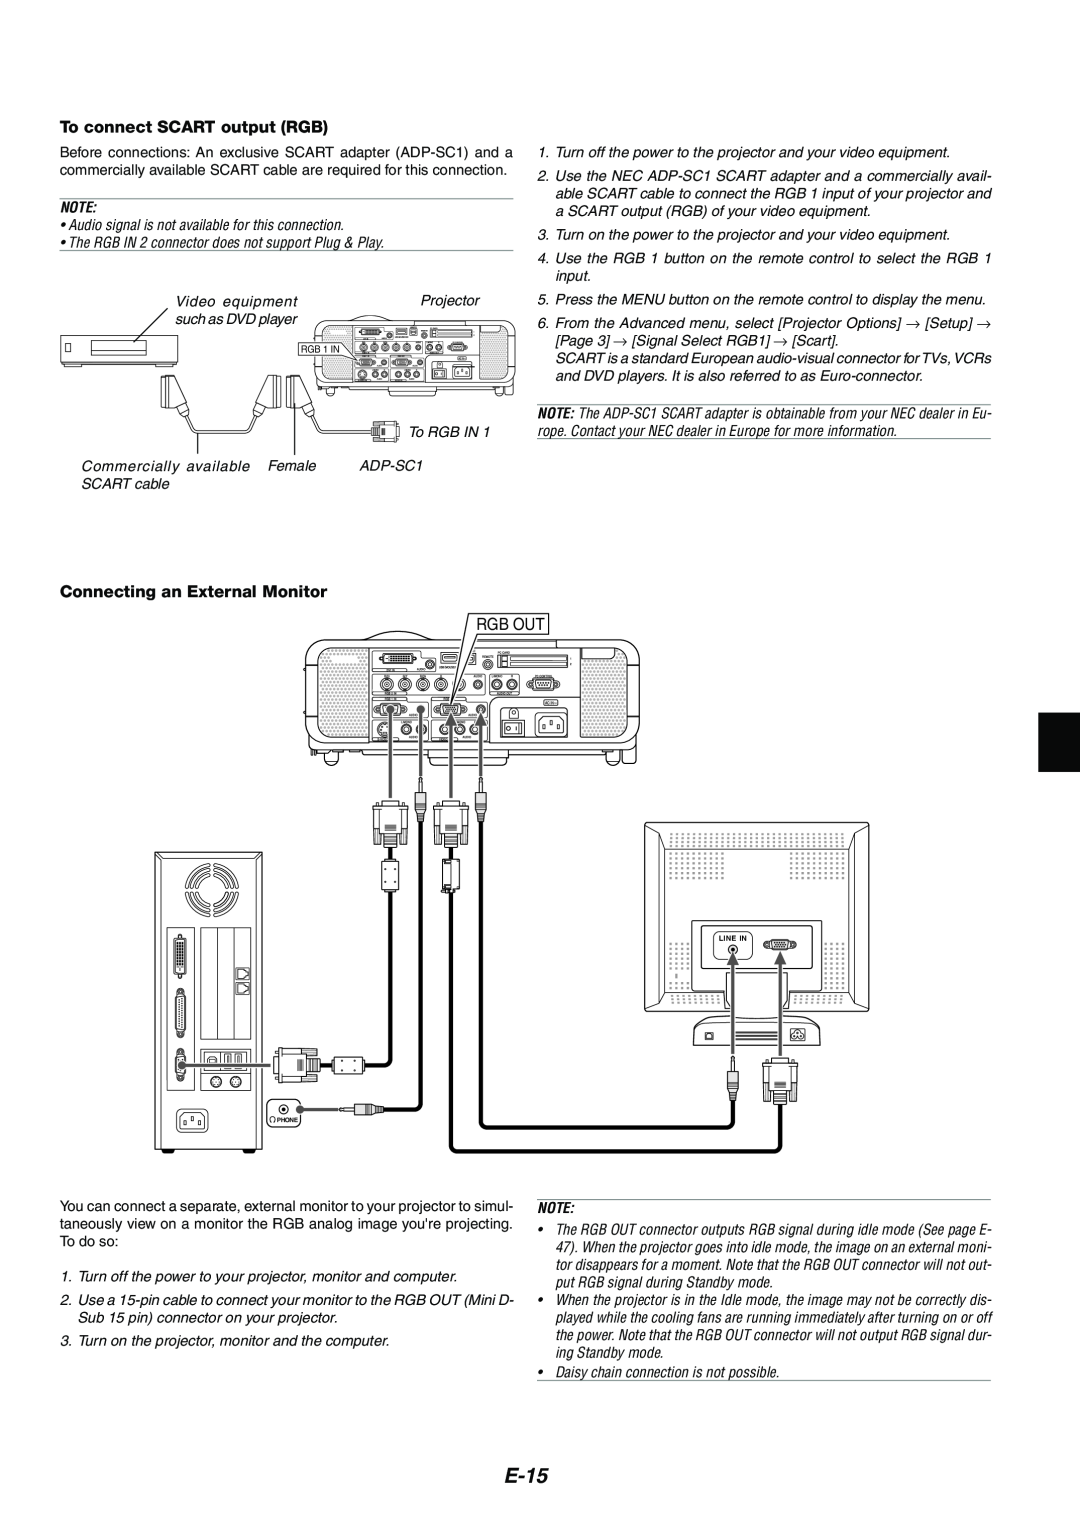 NEC MT1075/MT1065 user manual E-15, To connect SCART output RGB, Connecting an External Monitor 